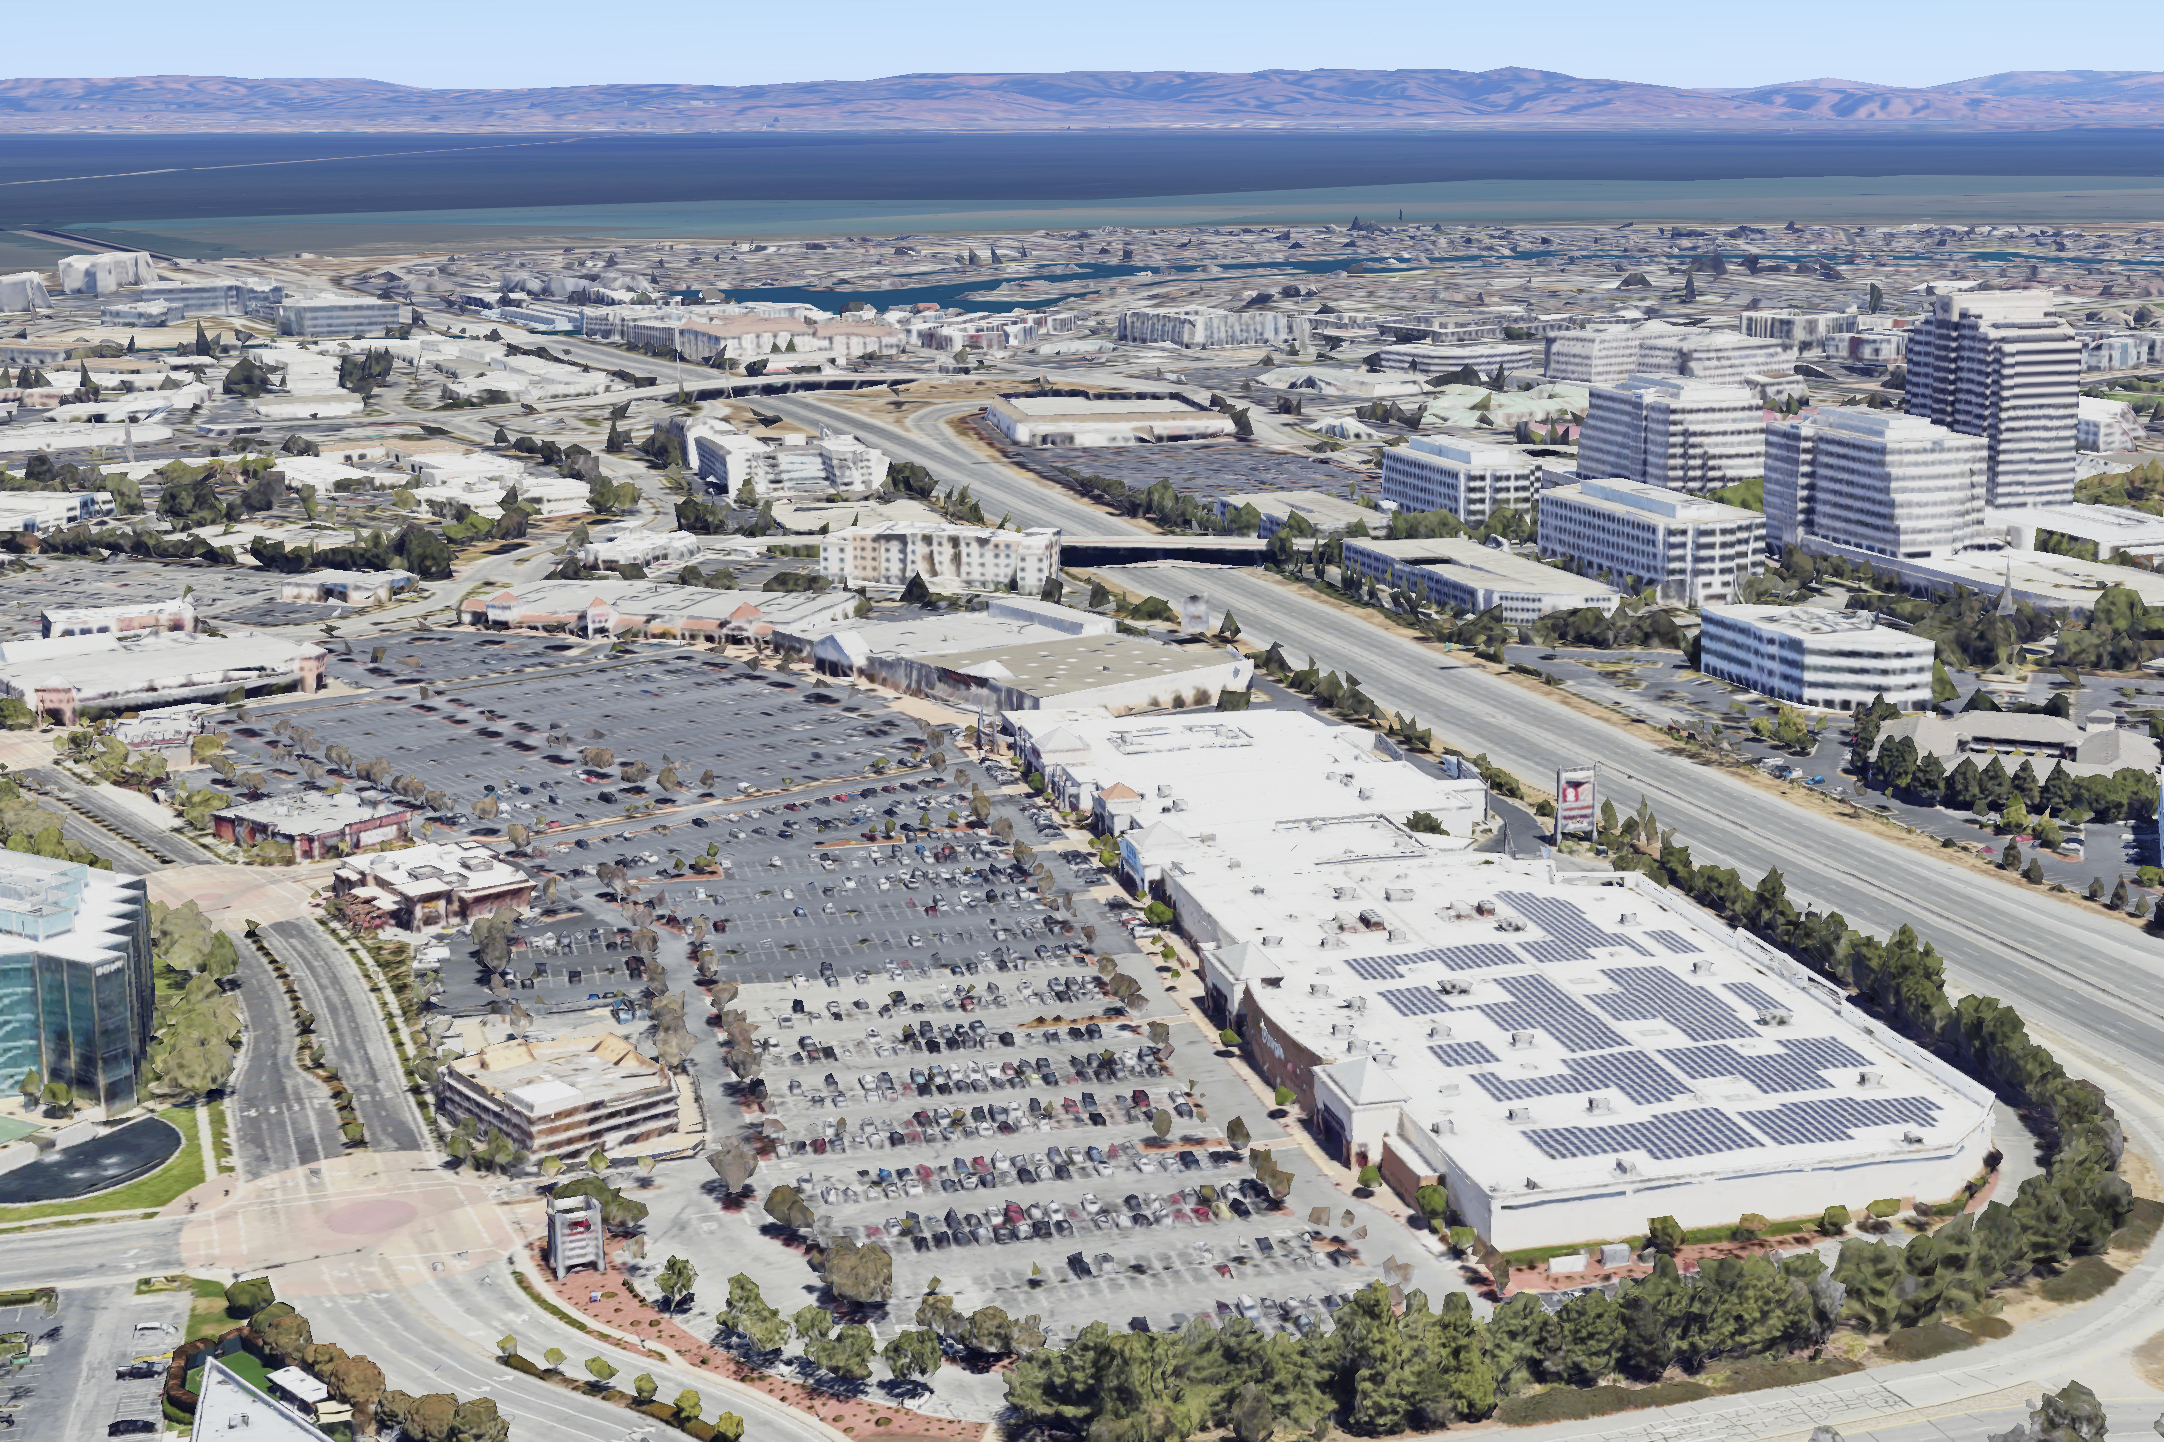 The image shows an expansive urban area with large buildings, parking lots filled with cars, and highways. In the background, there is a view of a wide bay and distant mountains.